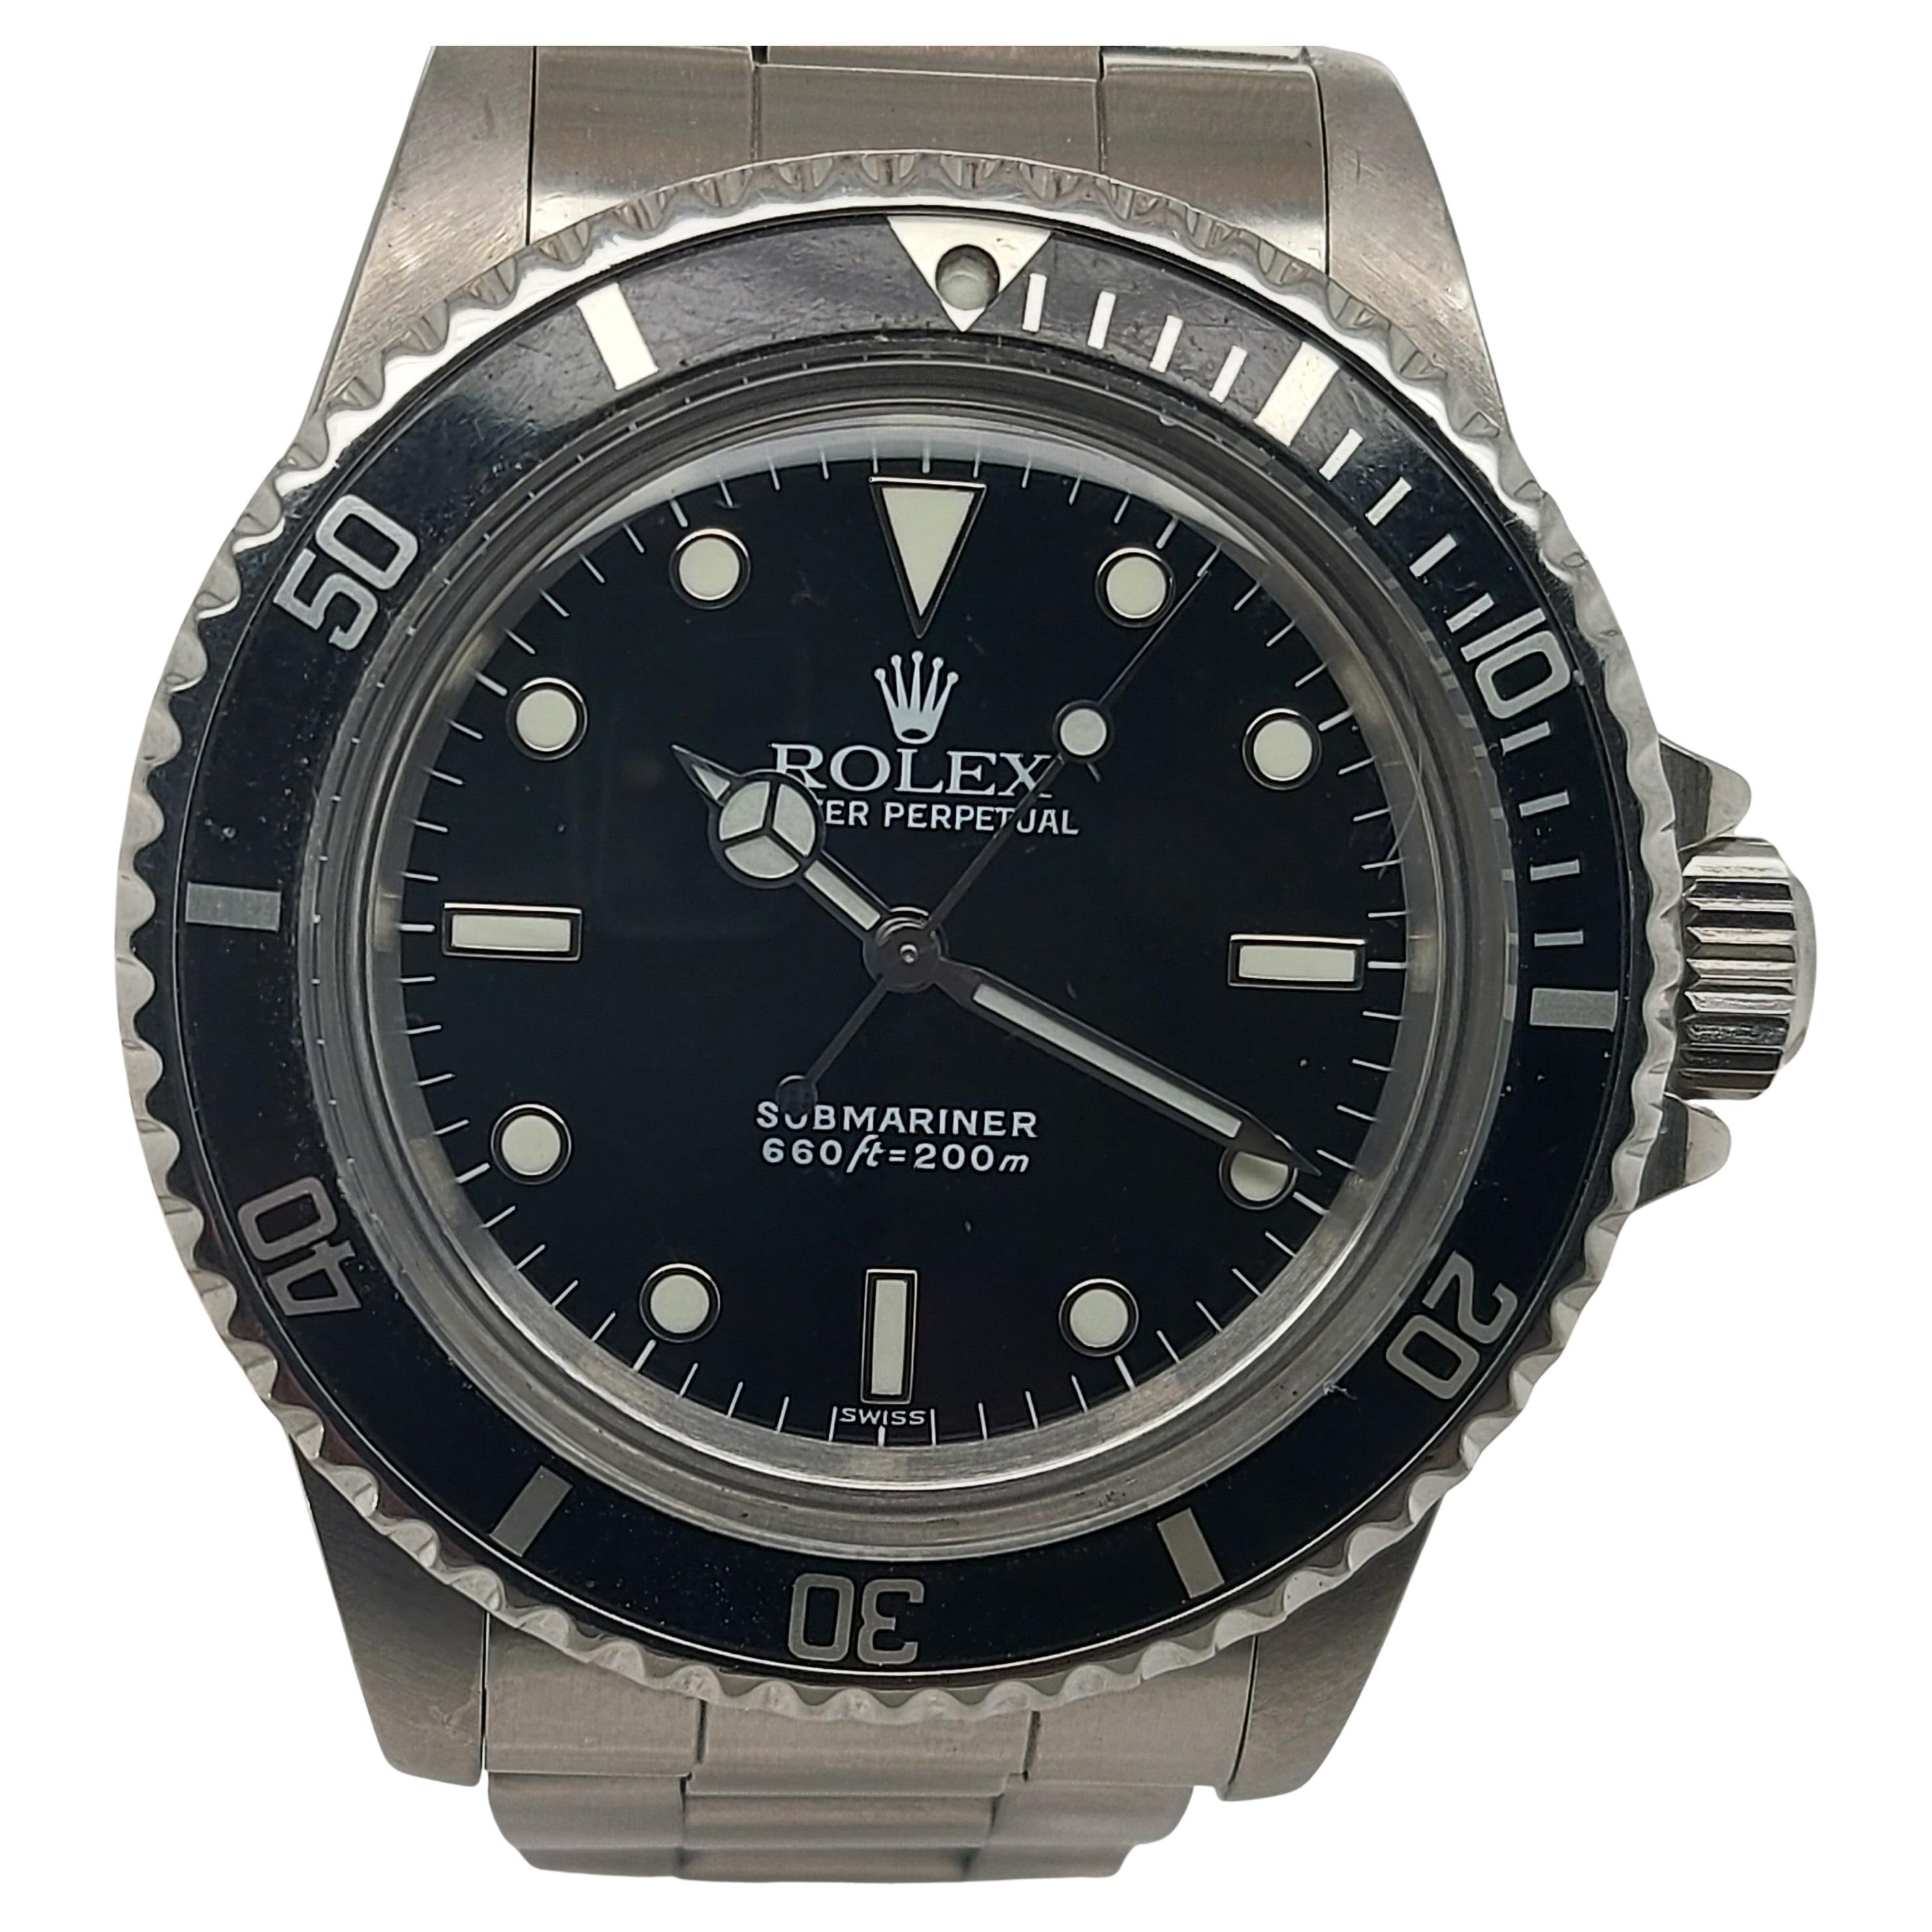 Rolex Submariner Ref. 5512/5513 Stainless Steel, Automatic, with Box and Papers